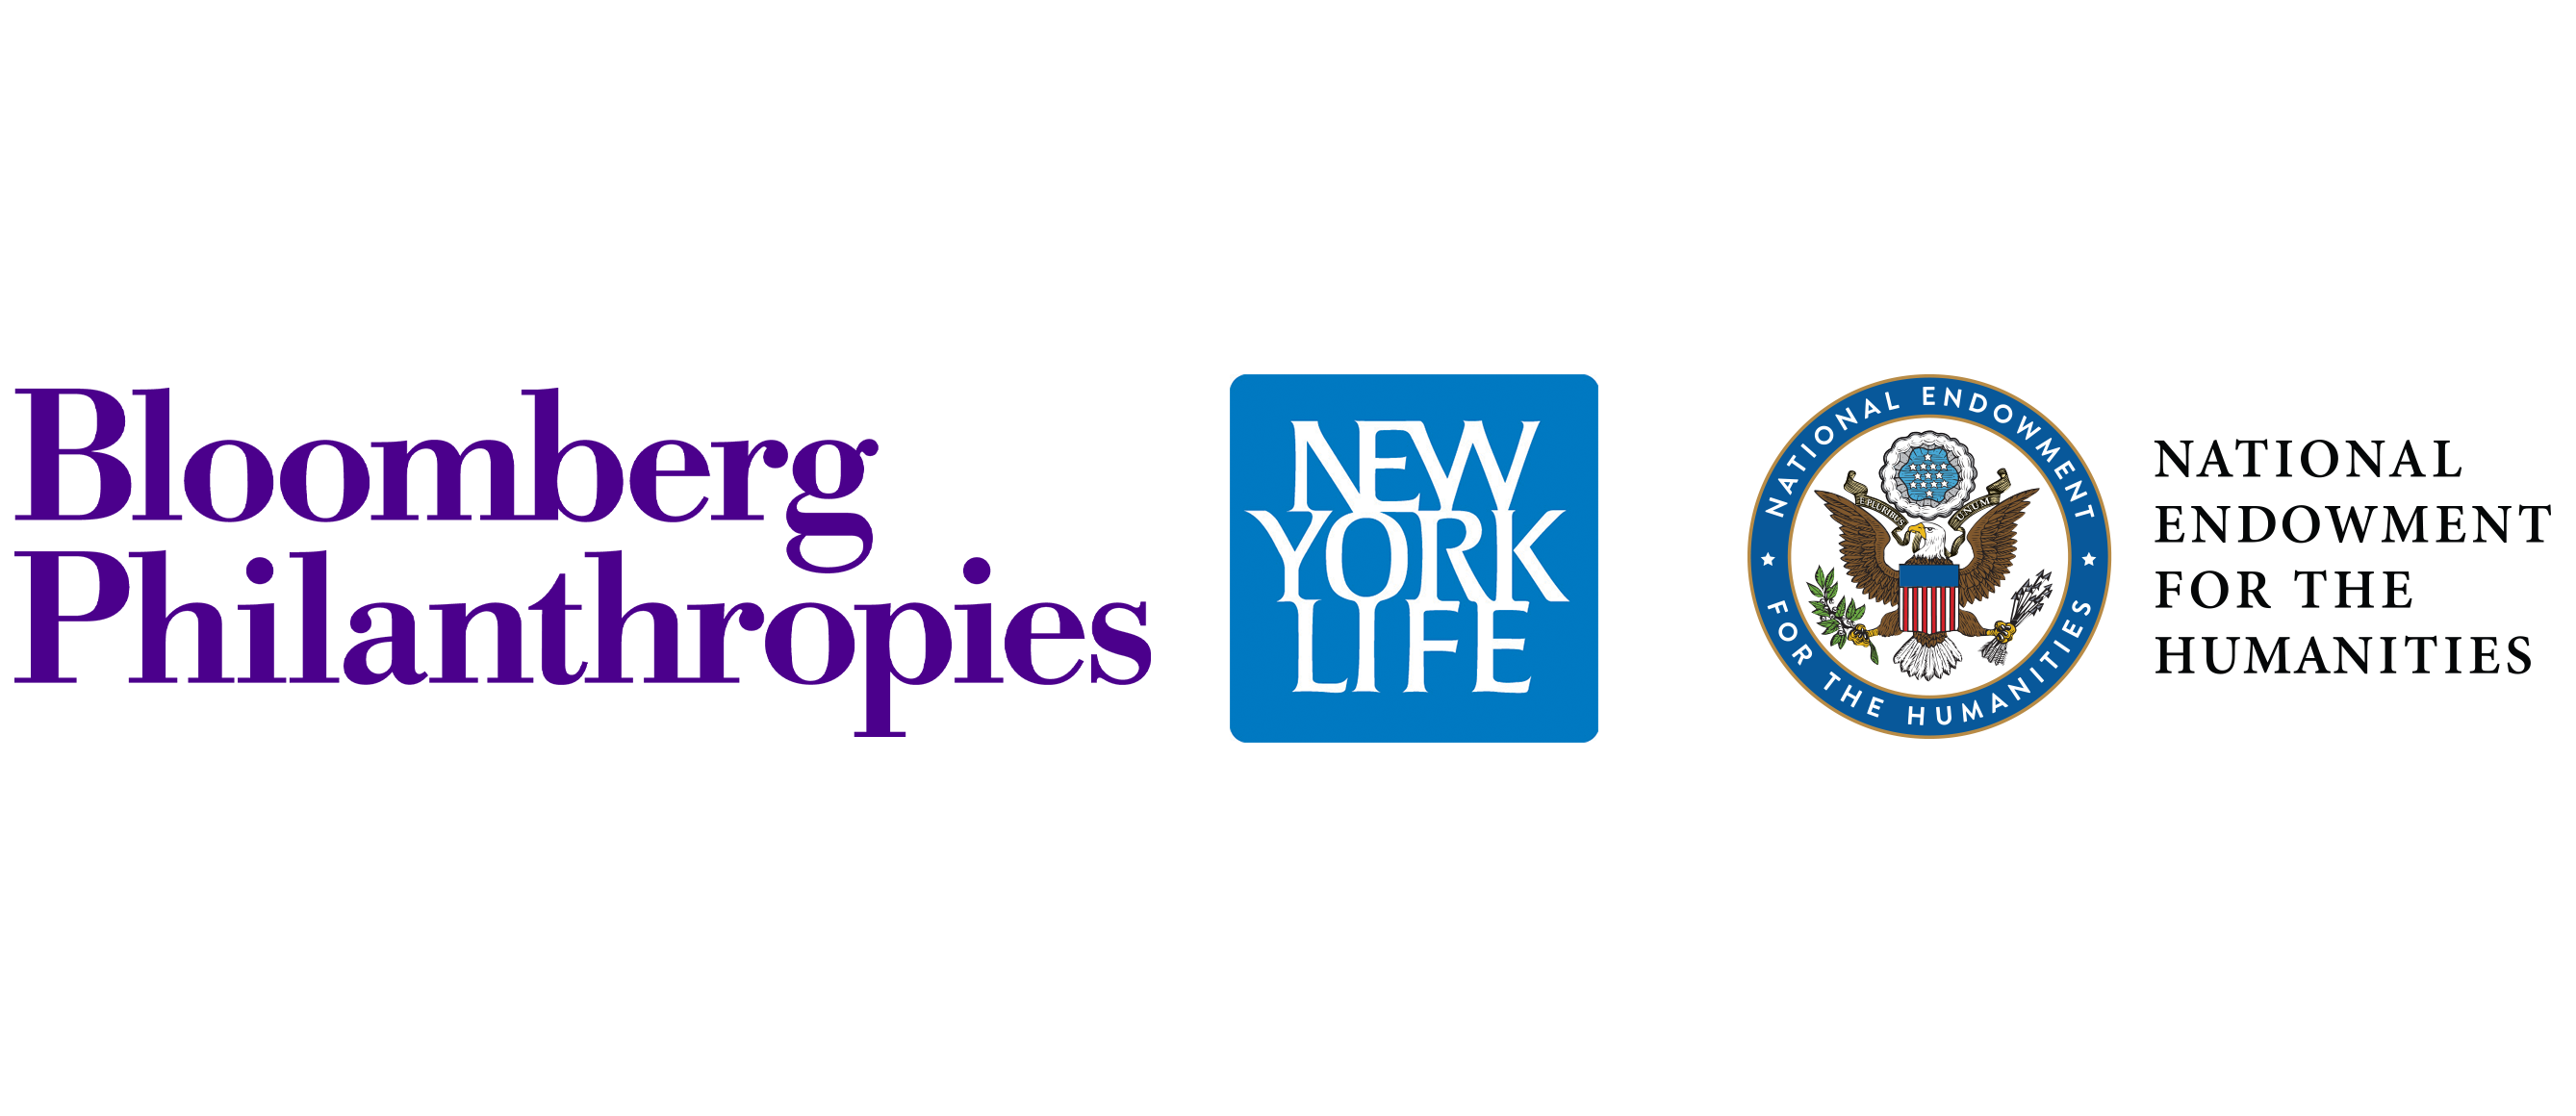 Bloomberg Philanthropies、New York Life、National Endowment for the Humanities のロゴ。